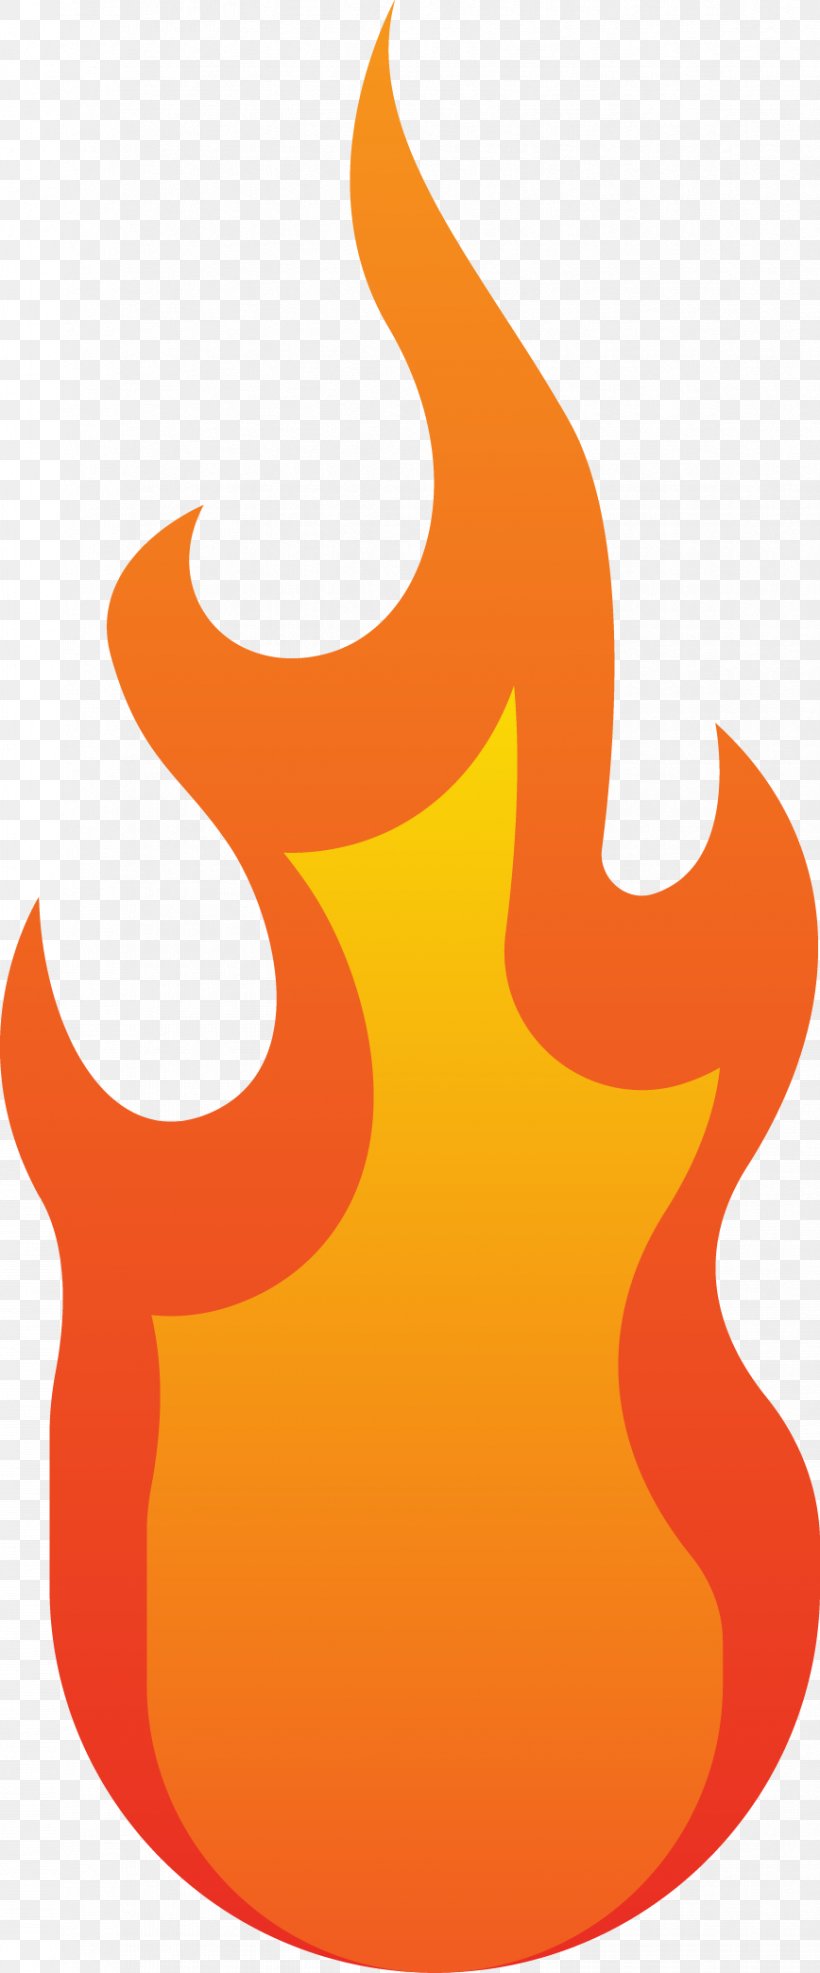 Fire Flame Combustion, PNG, 868x2089px, Fire, Adobe Fireworks, Android, Cartoon, Combustion Download Free